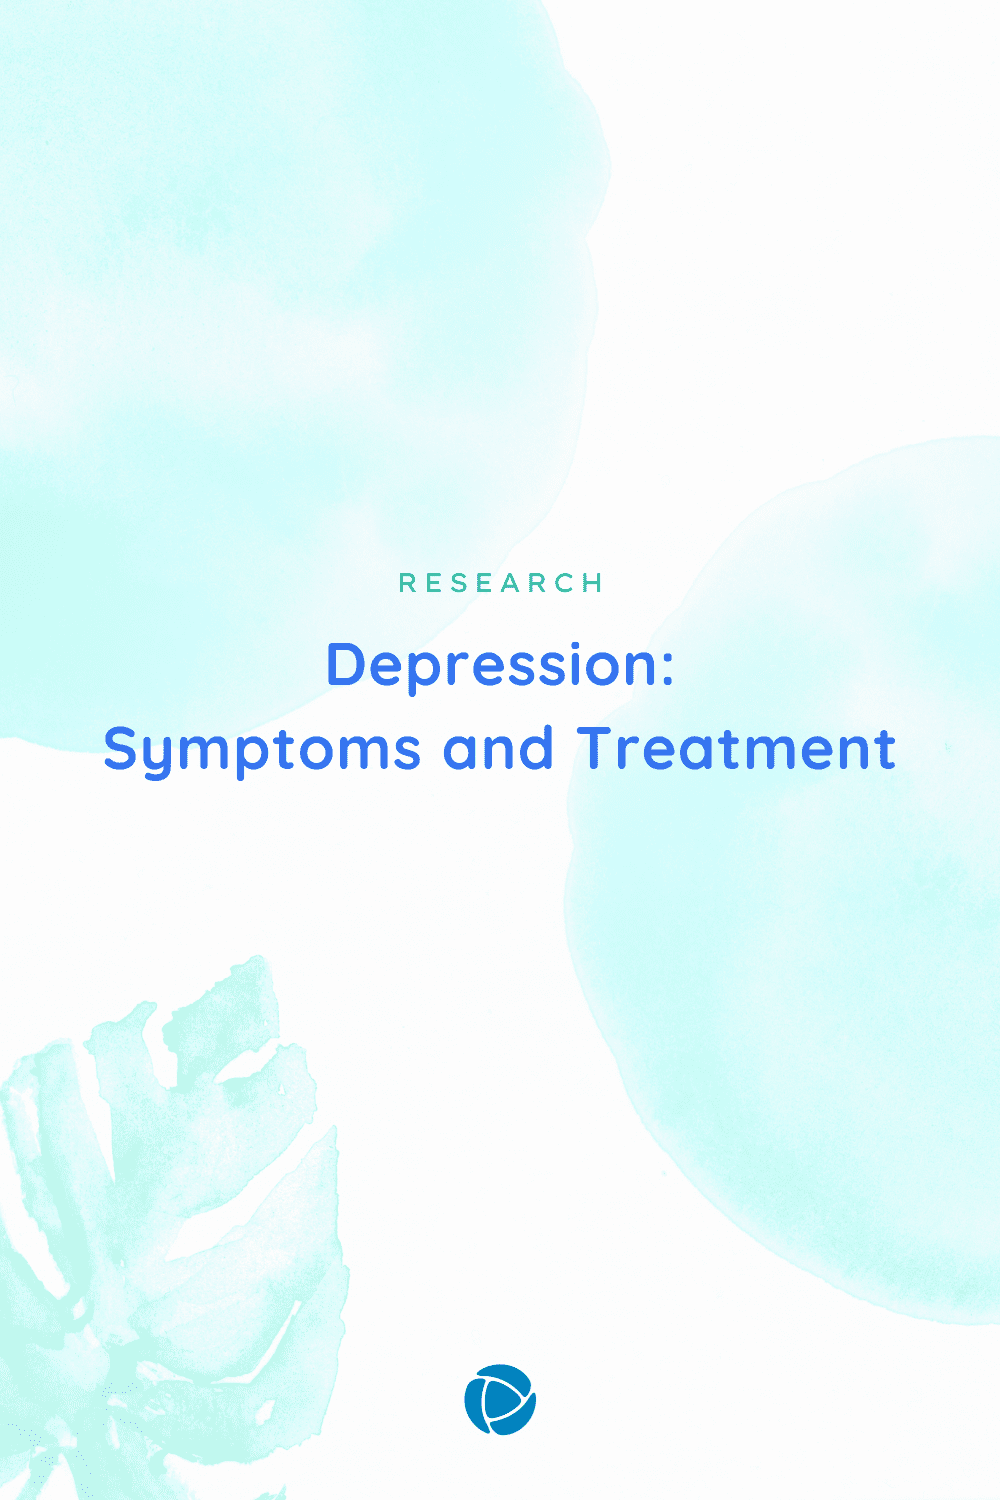 Symptoms of Depression and Treatment